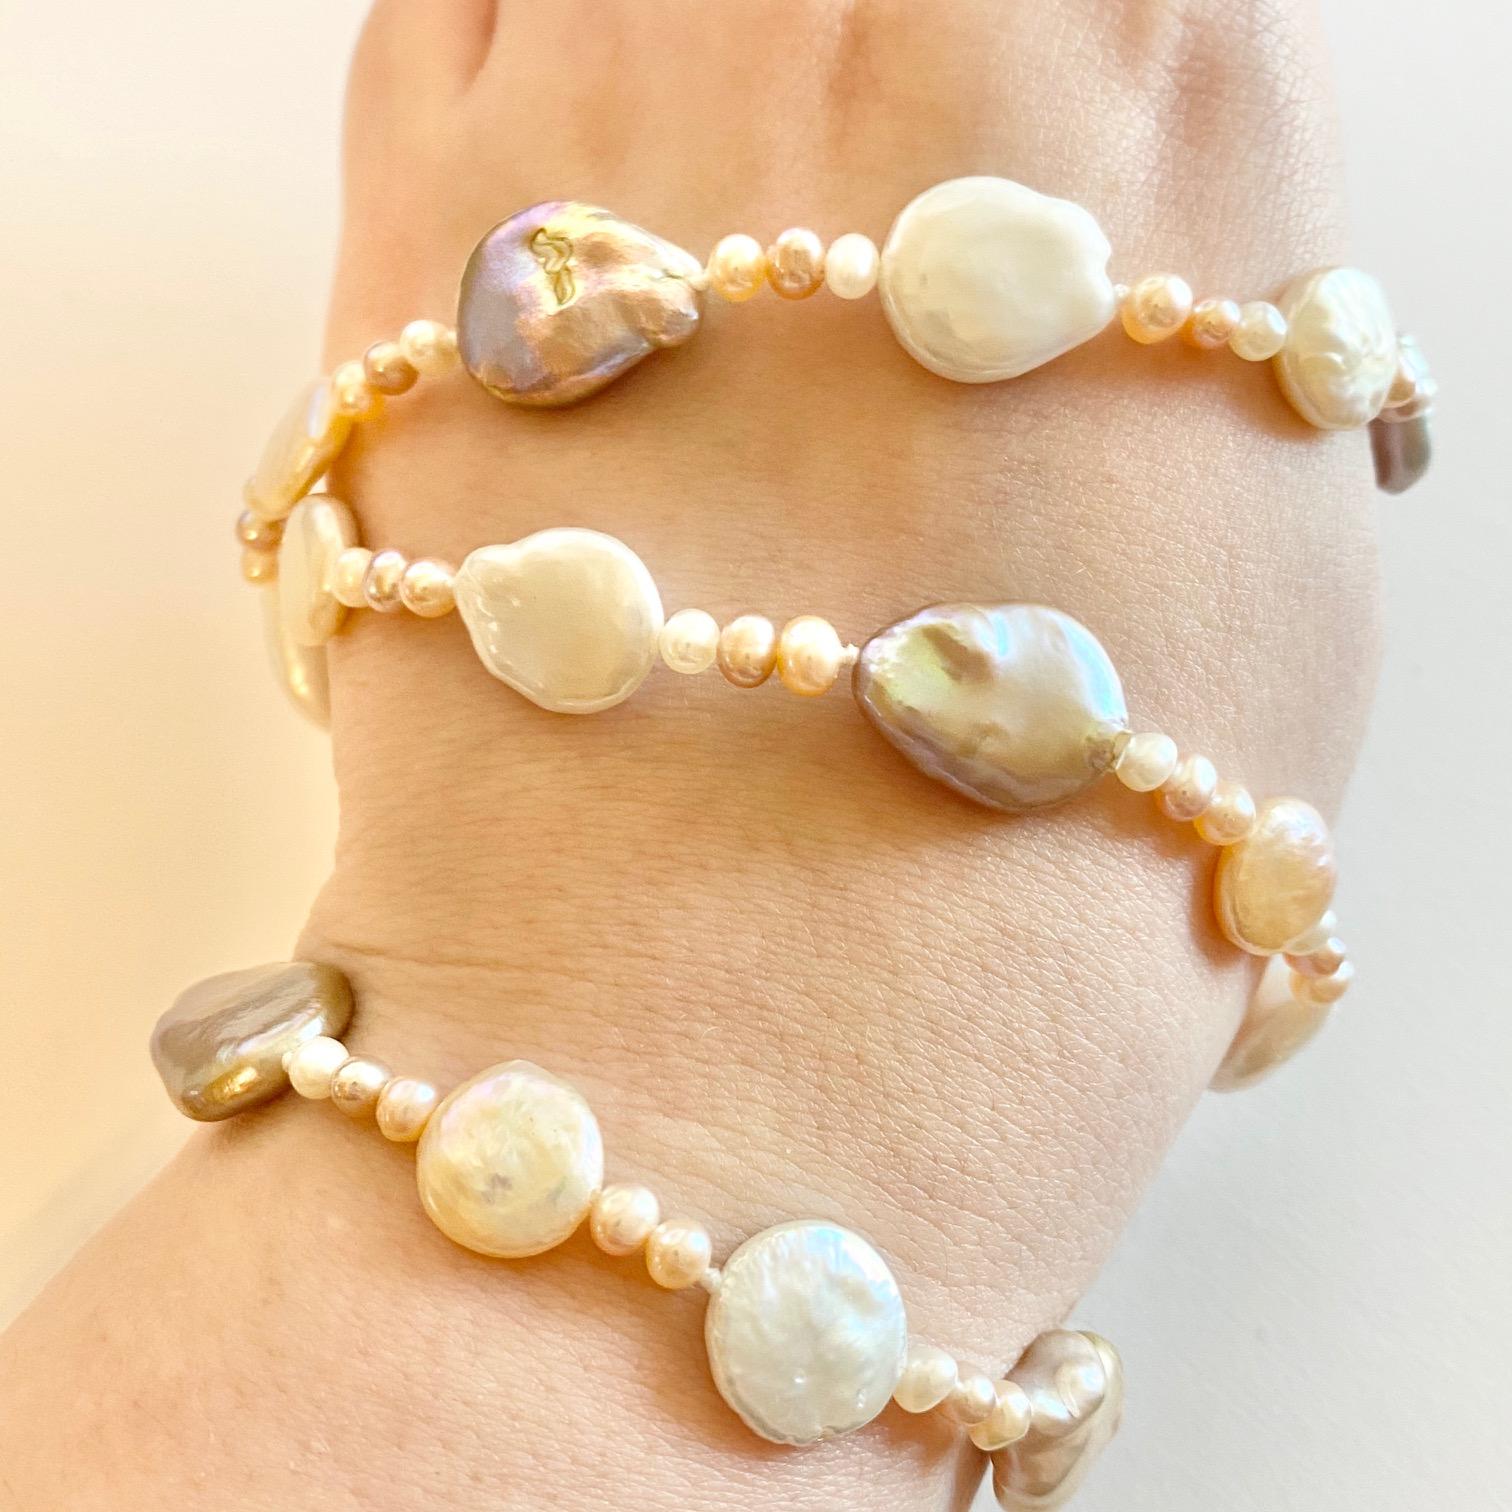 This pearl necklace has tons of gorgeous, creamy colors throughout it. These pearls have organic shapes that give them a unique style! The colors are a mix of rose pinks and whites that goes perfectly with any skin tone! The pearls range in size and